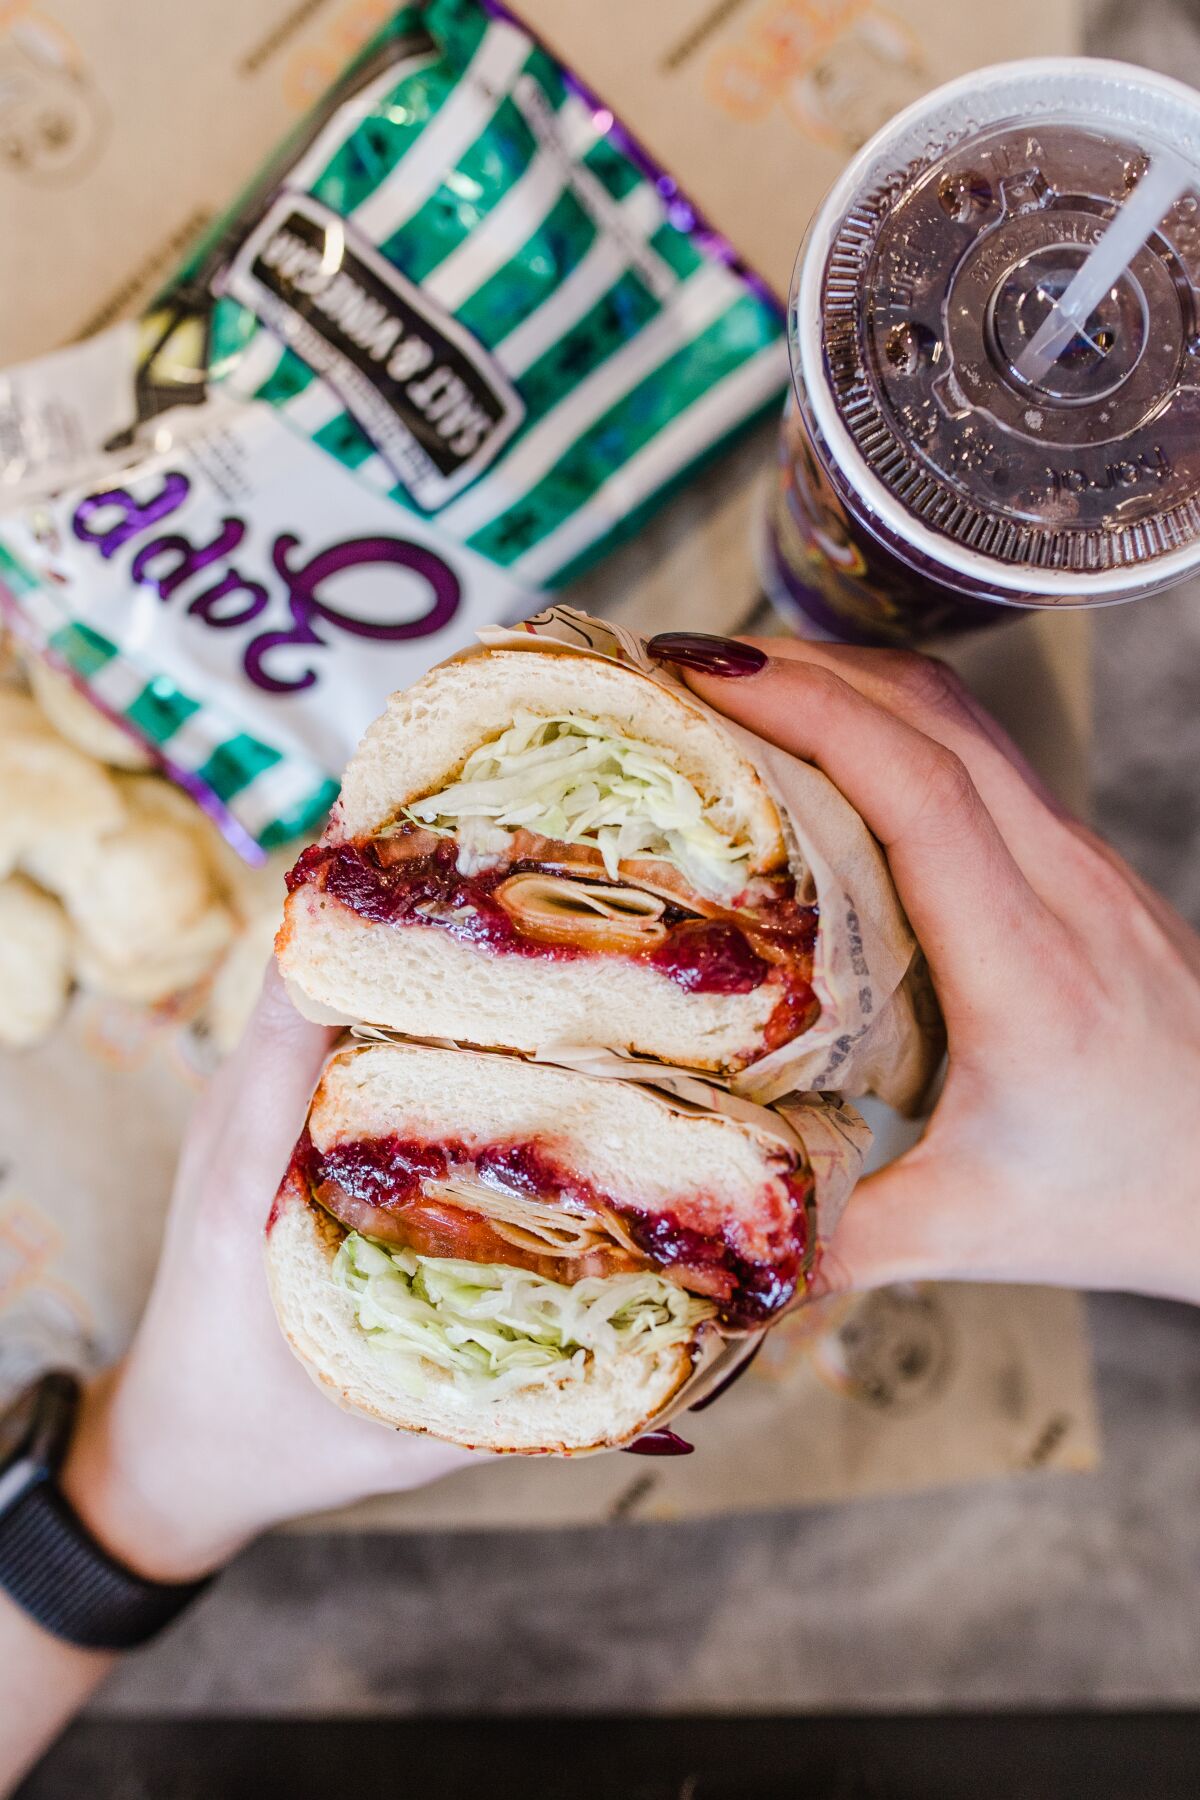 A lot of love stuffed into Ike's Sandwiches.